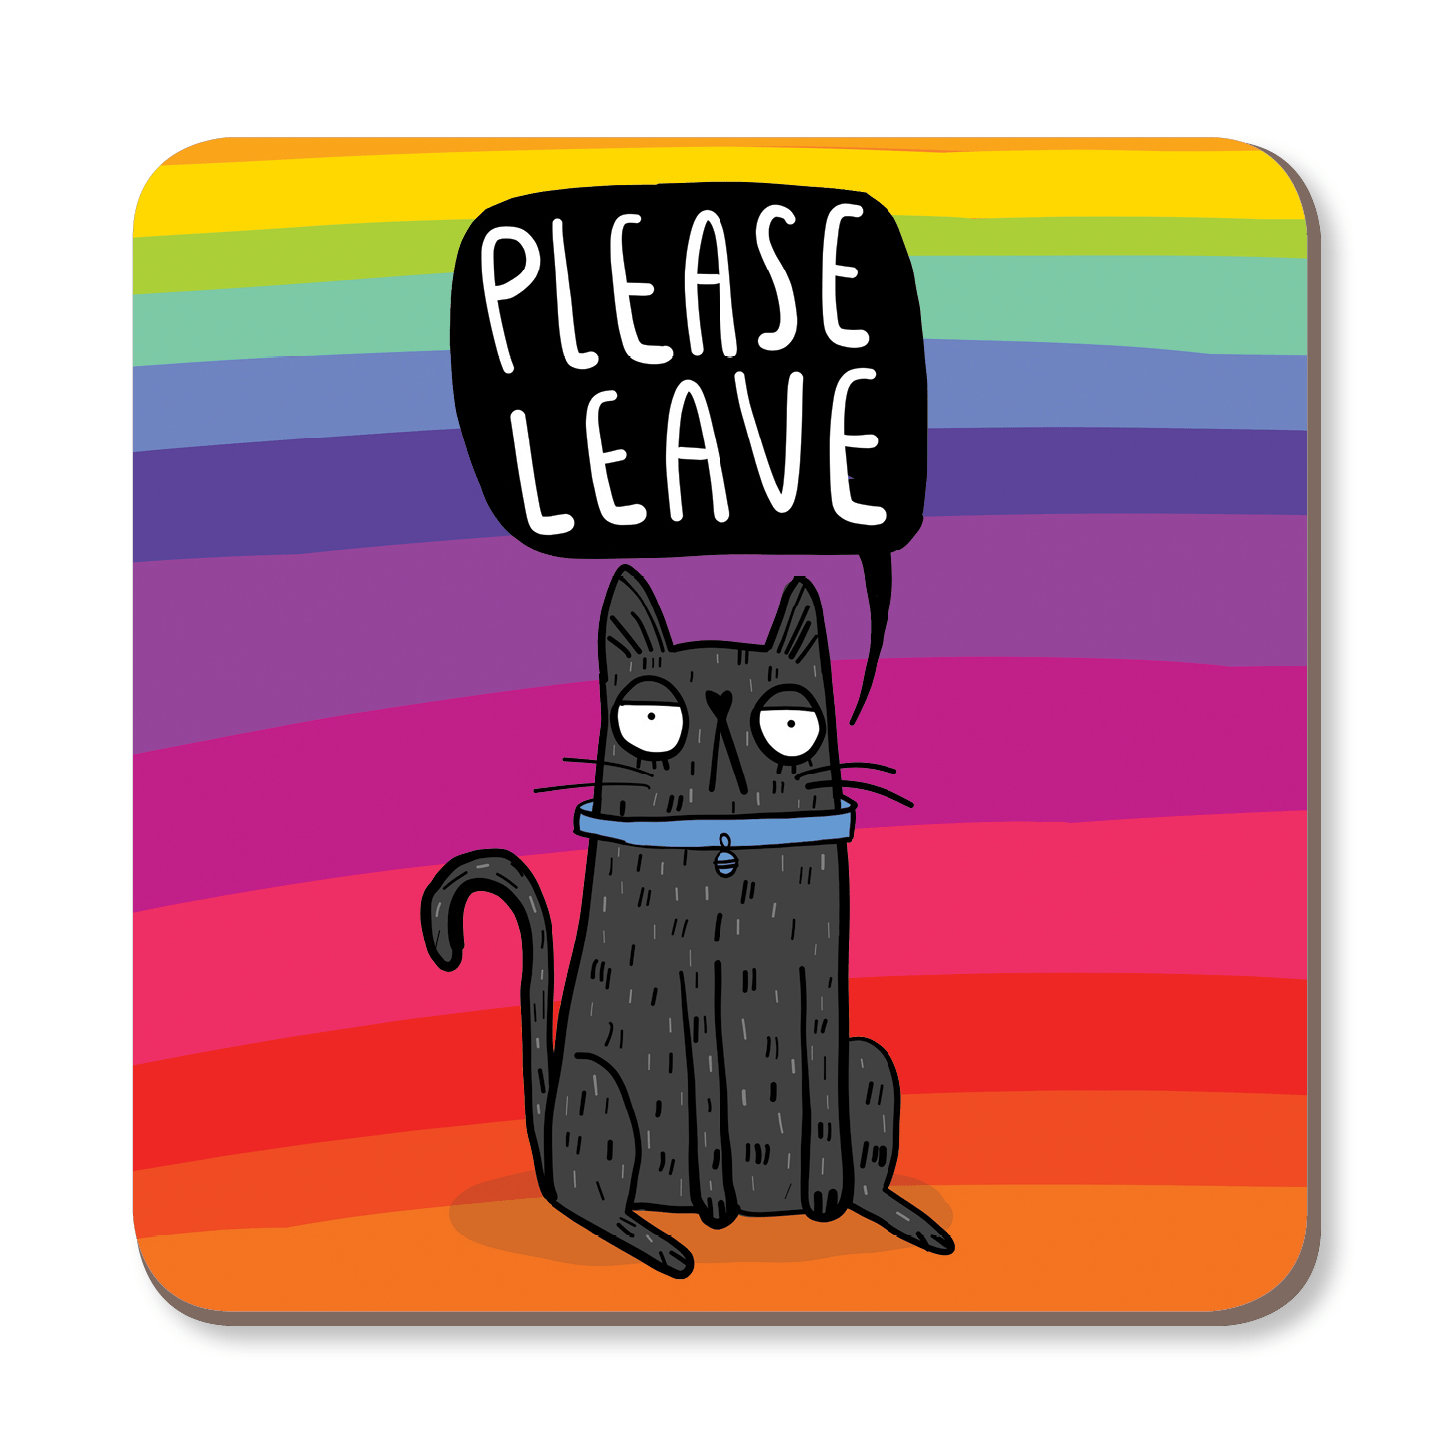 Please Leave Coaster by Katie Abey - Whale and Bird